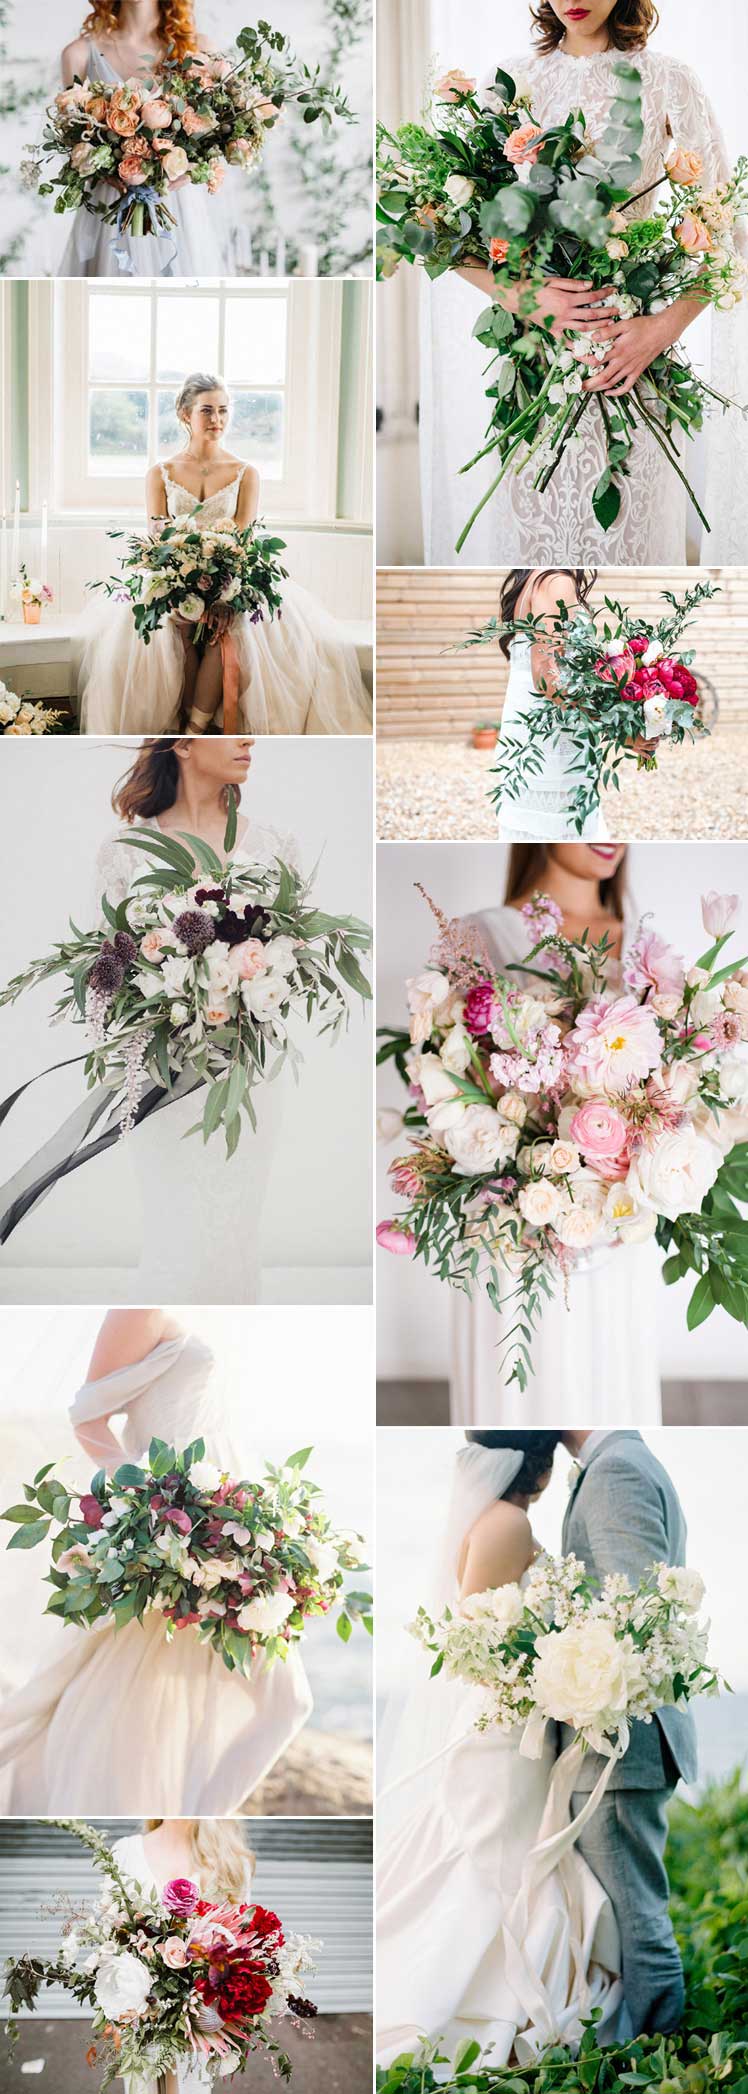 Oversized bridal bouquets for a dramatic wedding day style